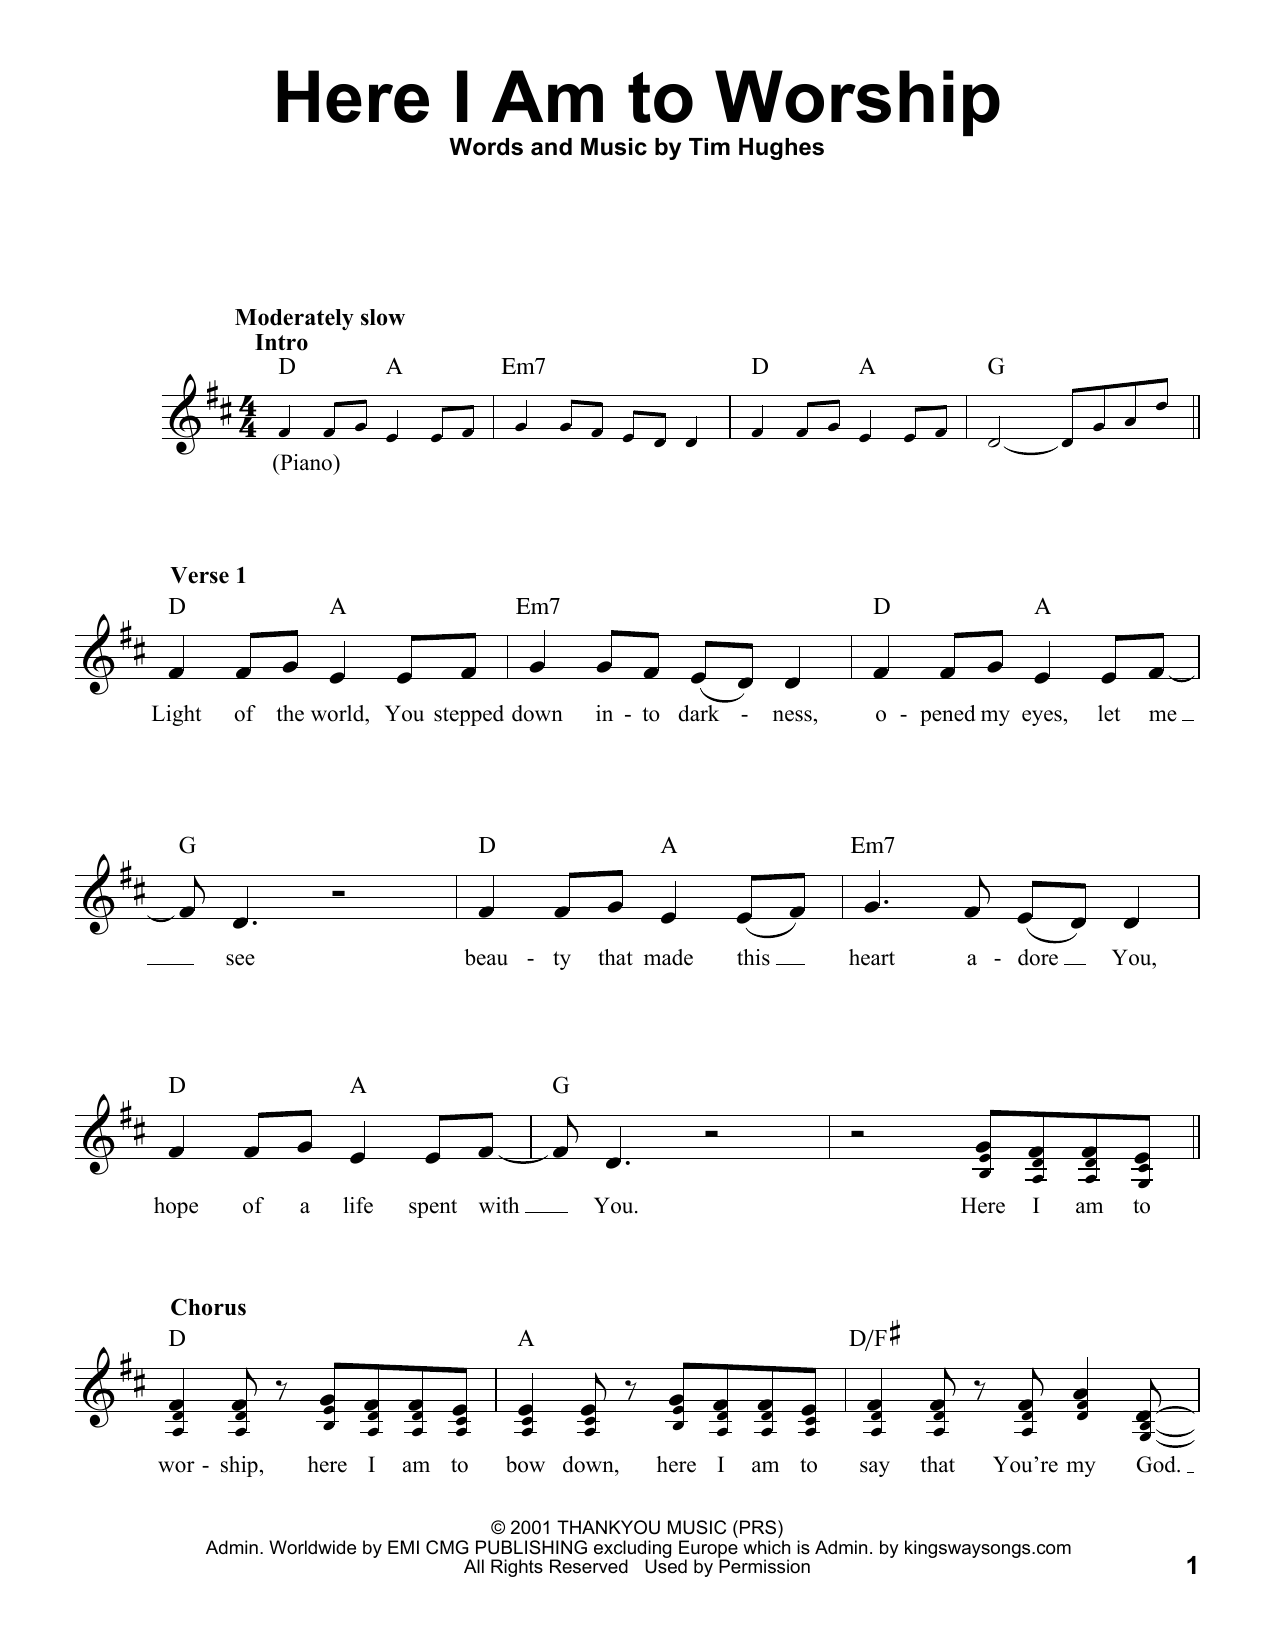 Download Tim Hughes Here I Am To Worship (Light Of The Worl Sheet Music